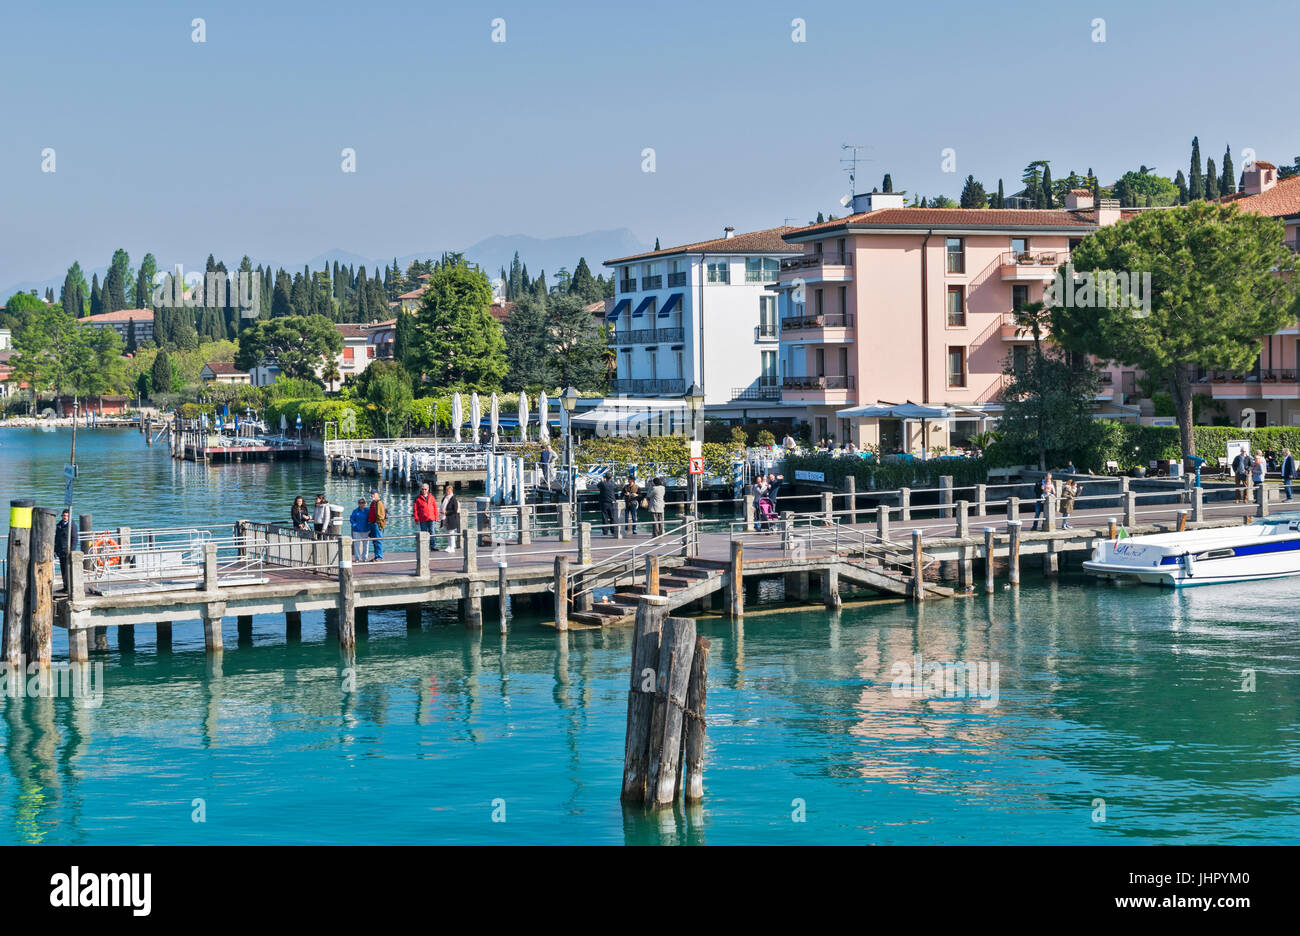 LAKE GARDA SIRMIONE LAKESIDE FRONT APPROACHED BY BOAT WITH PASSENGERS WAITING ON THE JETTY Stock Photo